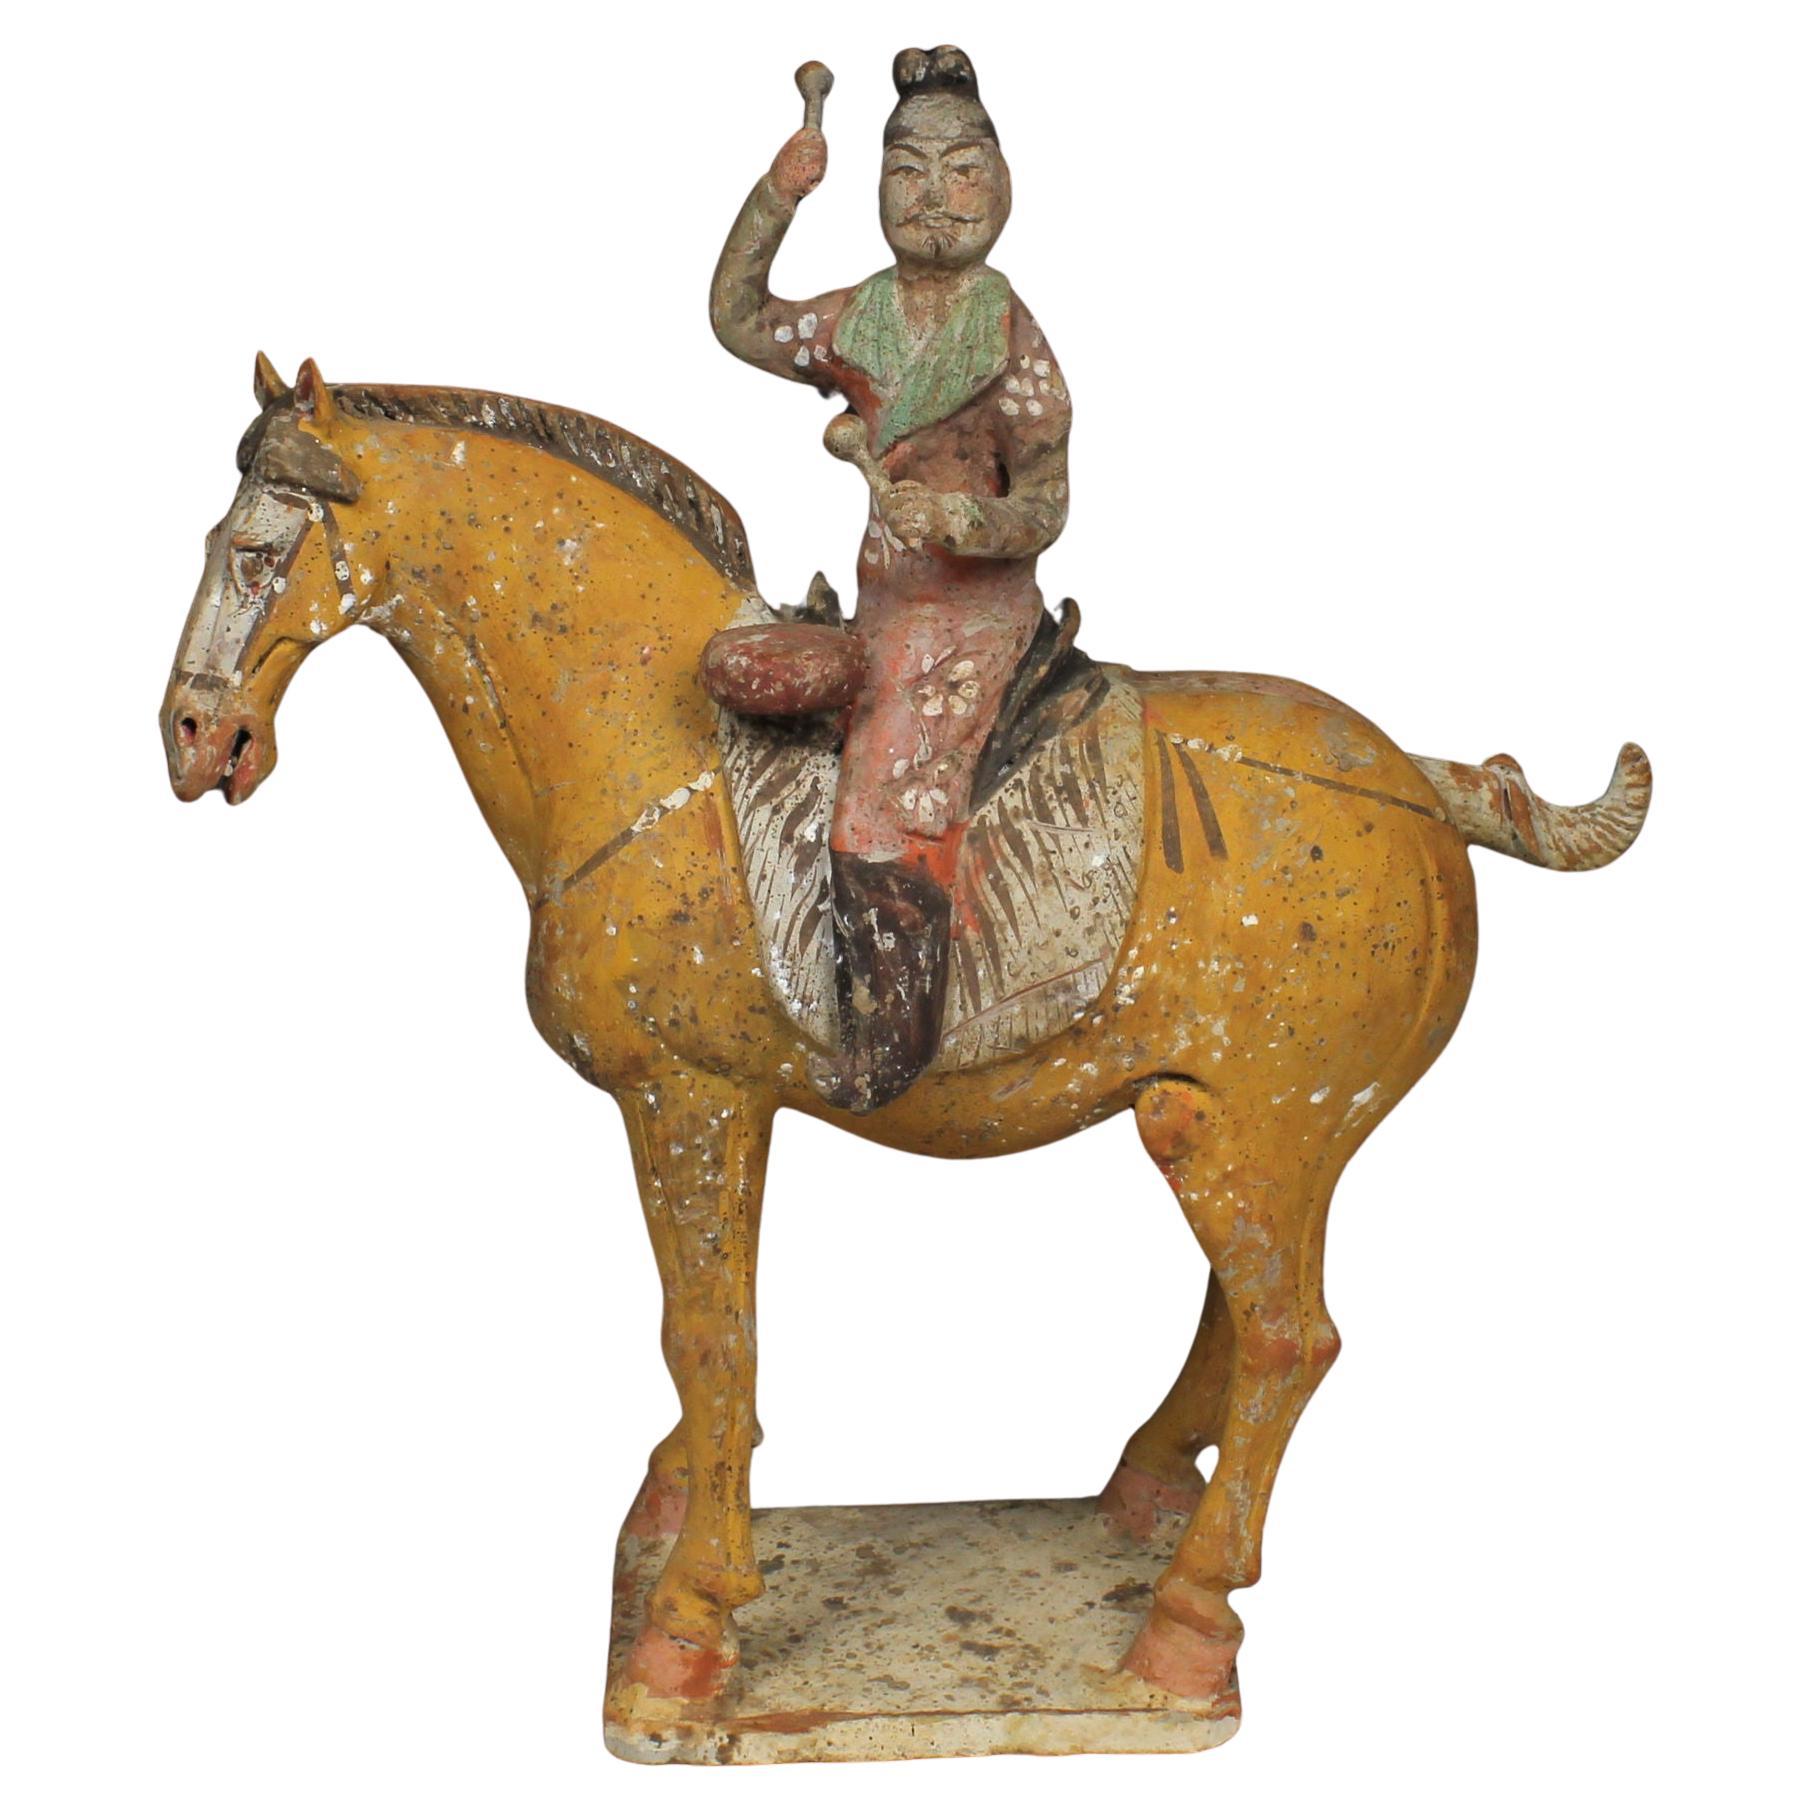 Chinese statuette of a horse with musician